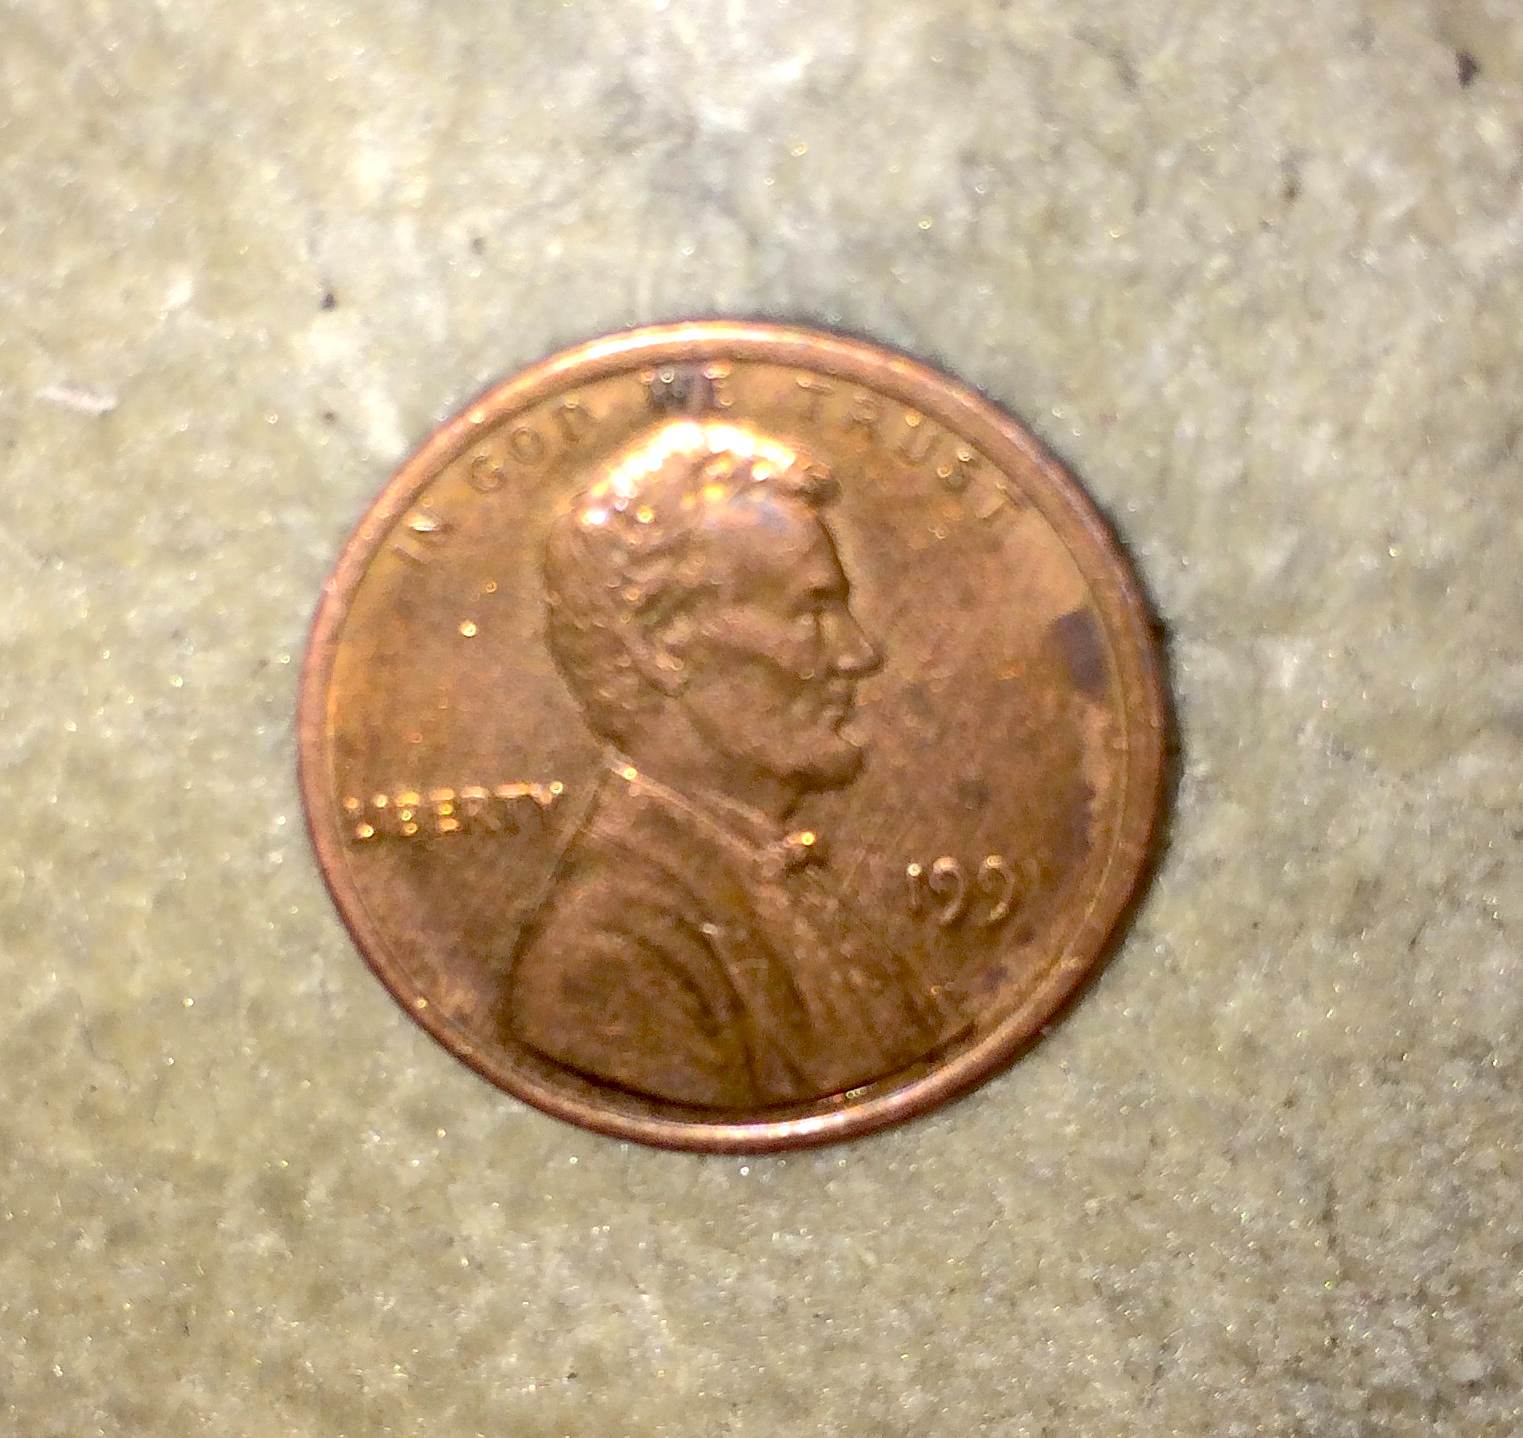 199-d-error-date-penny-collectibles-coins-money-lifepharmafze